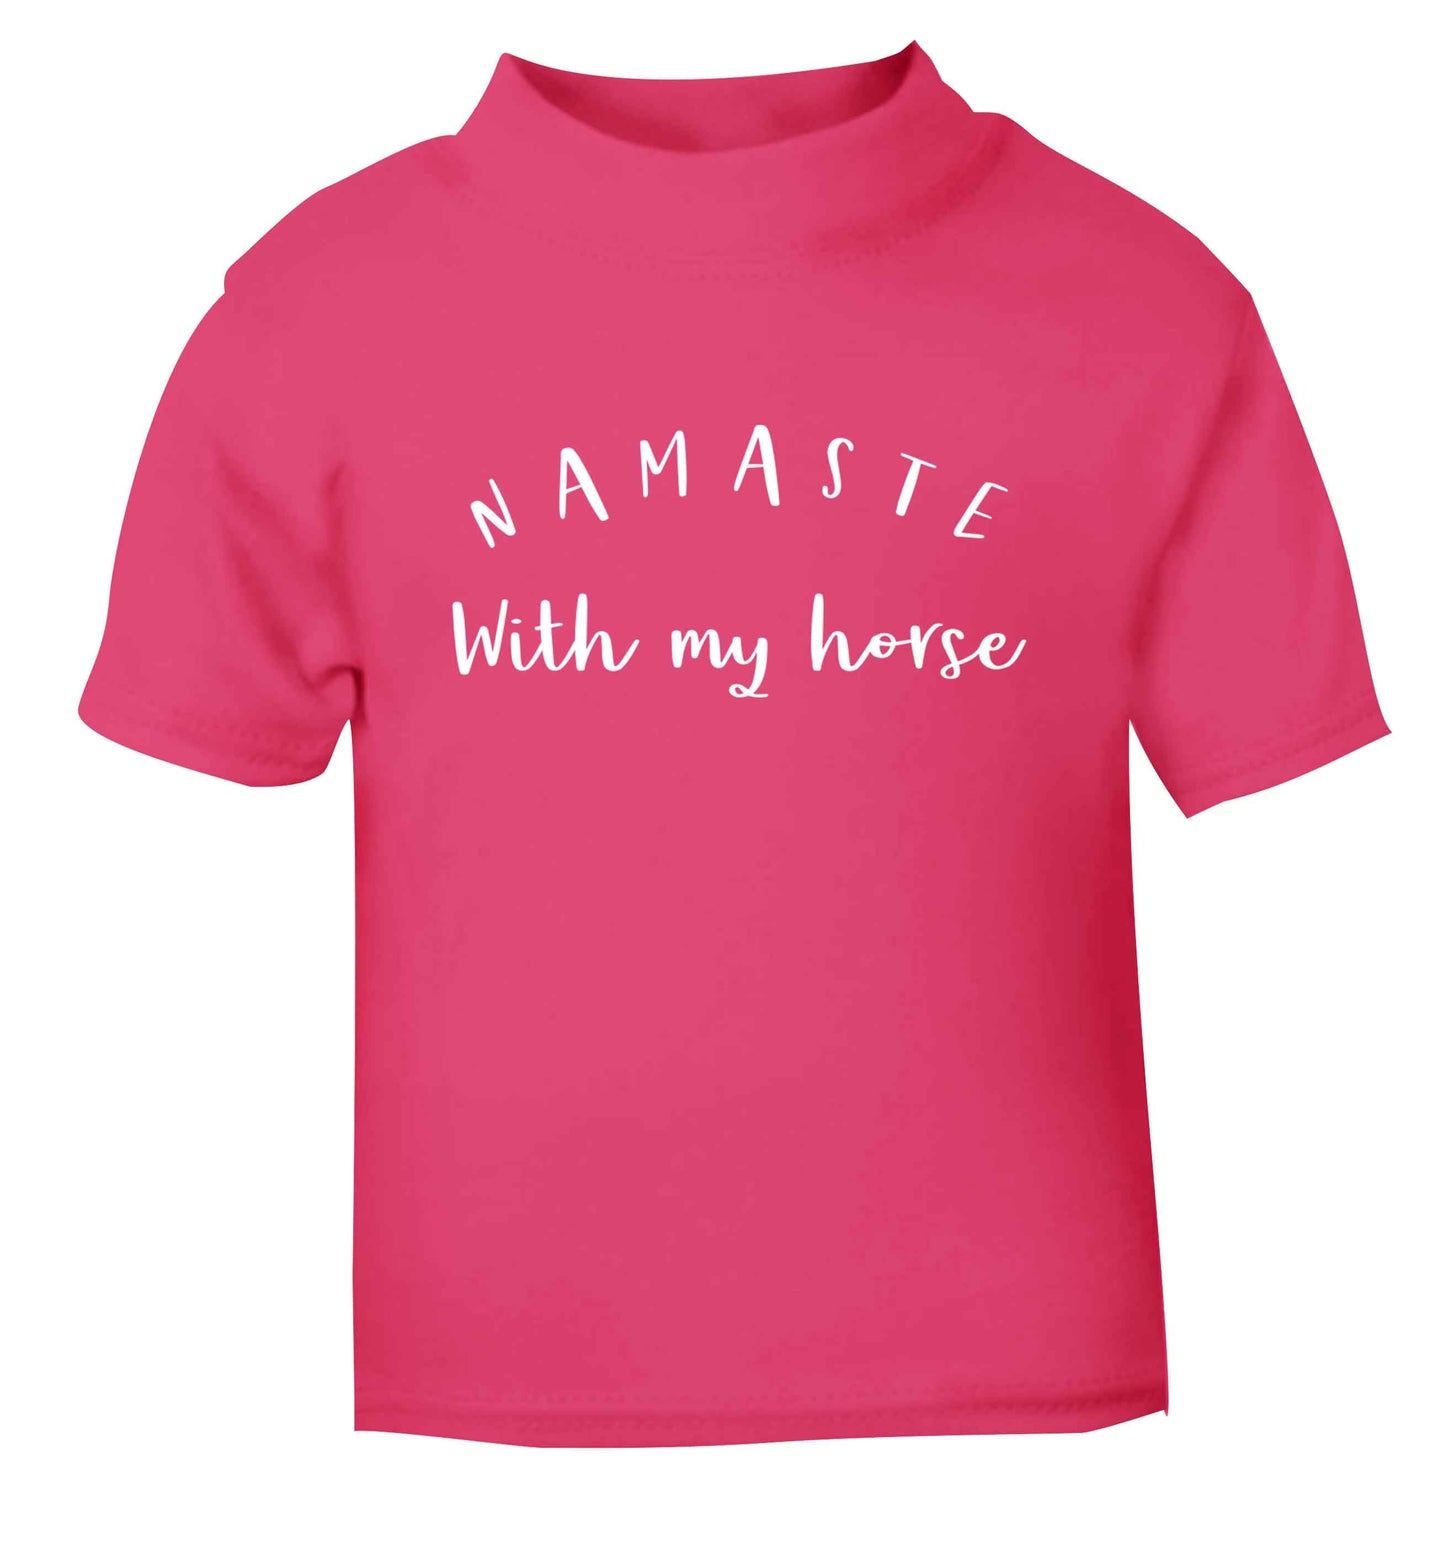 Namaste with my horse pink baby toddler Tshirt 2 Years